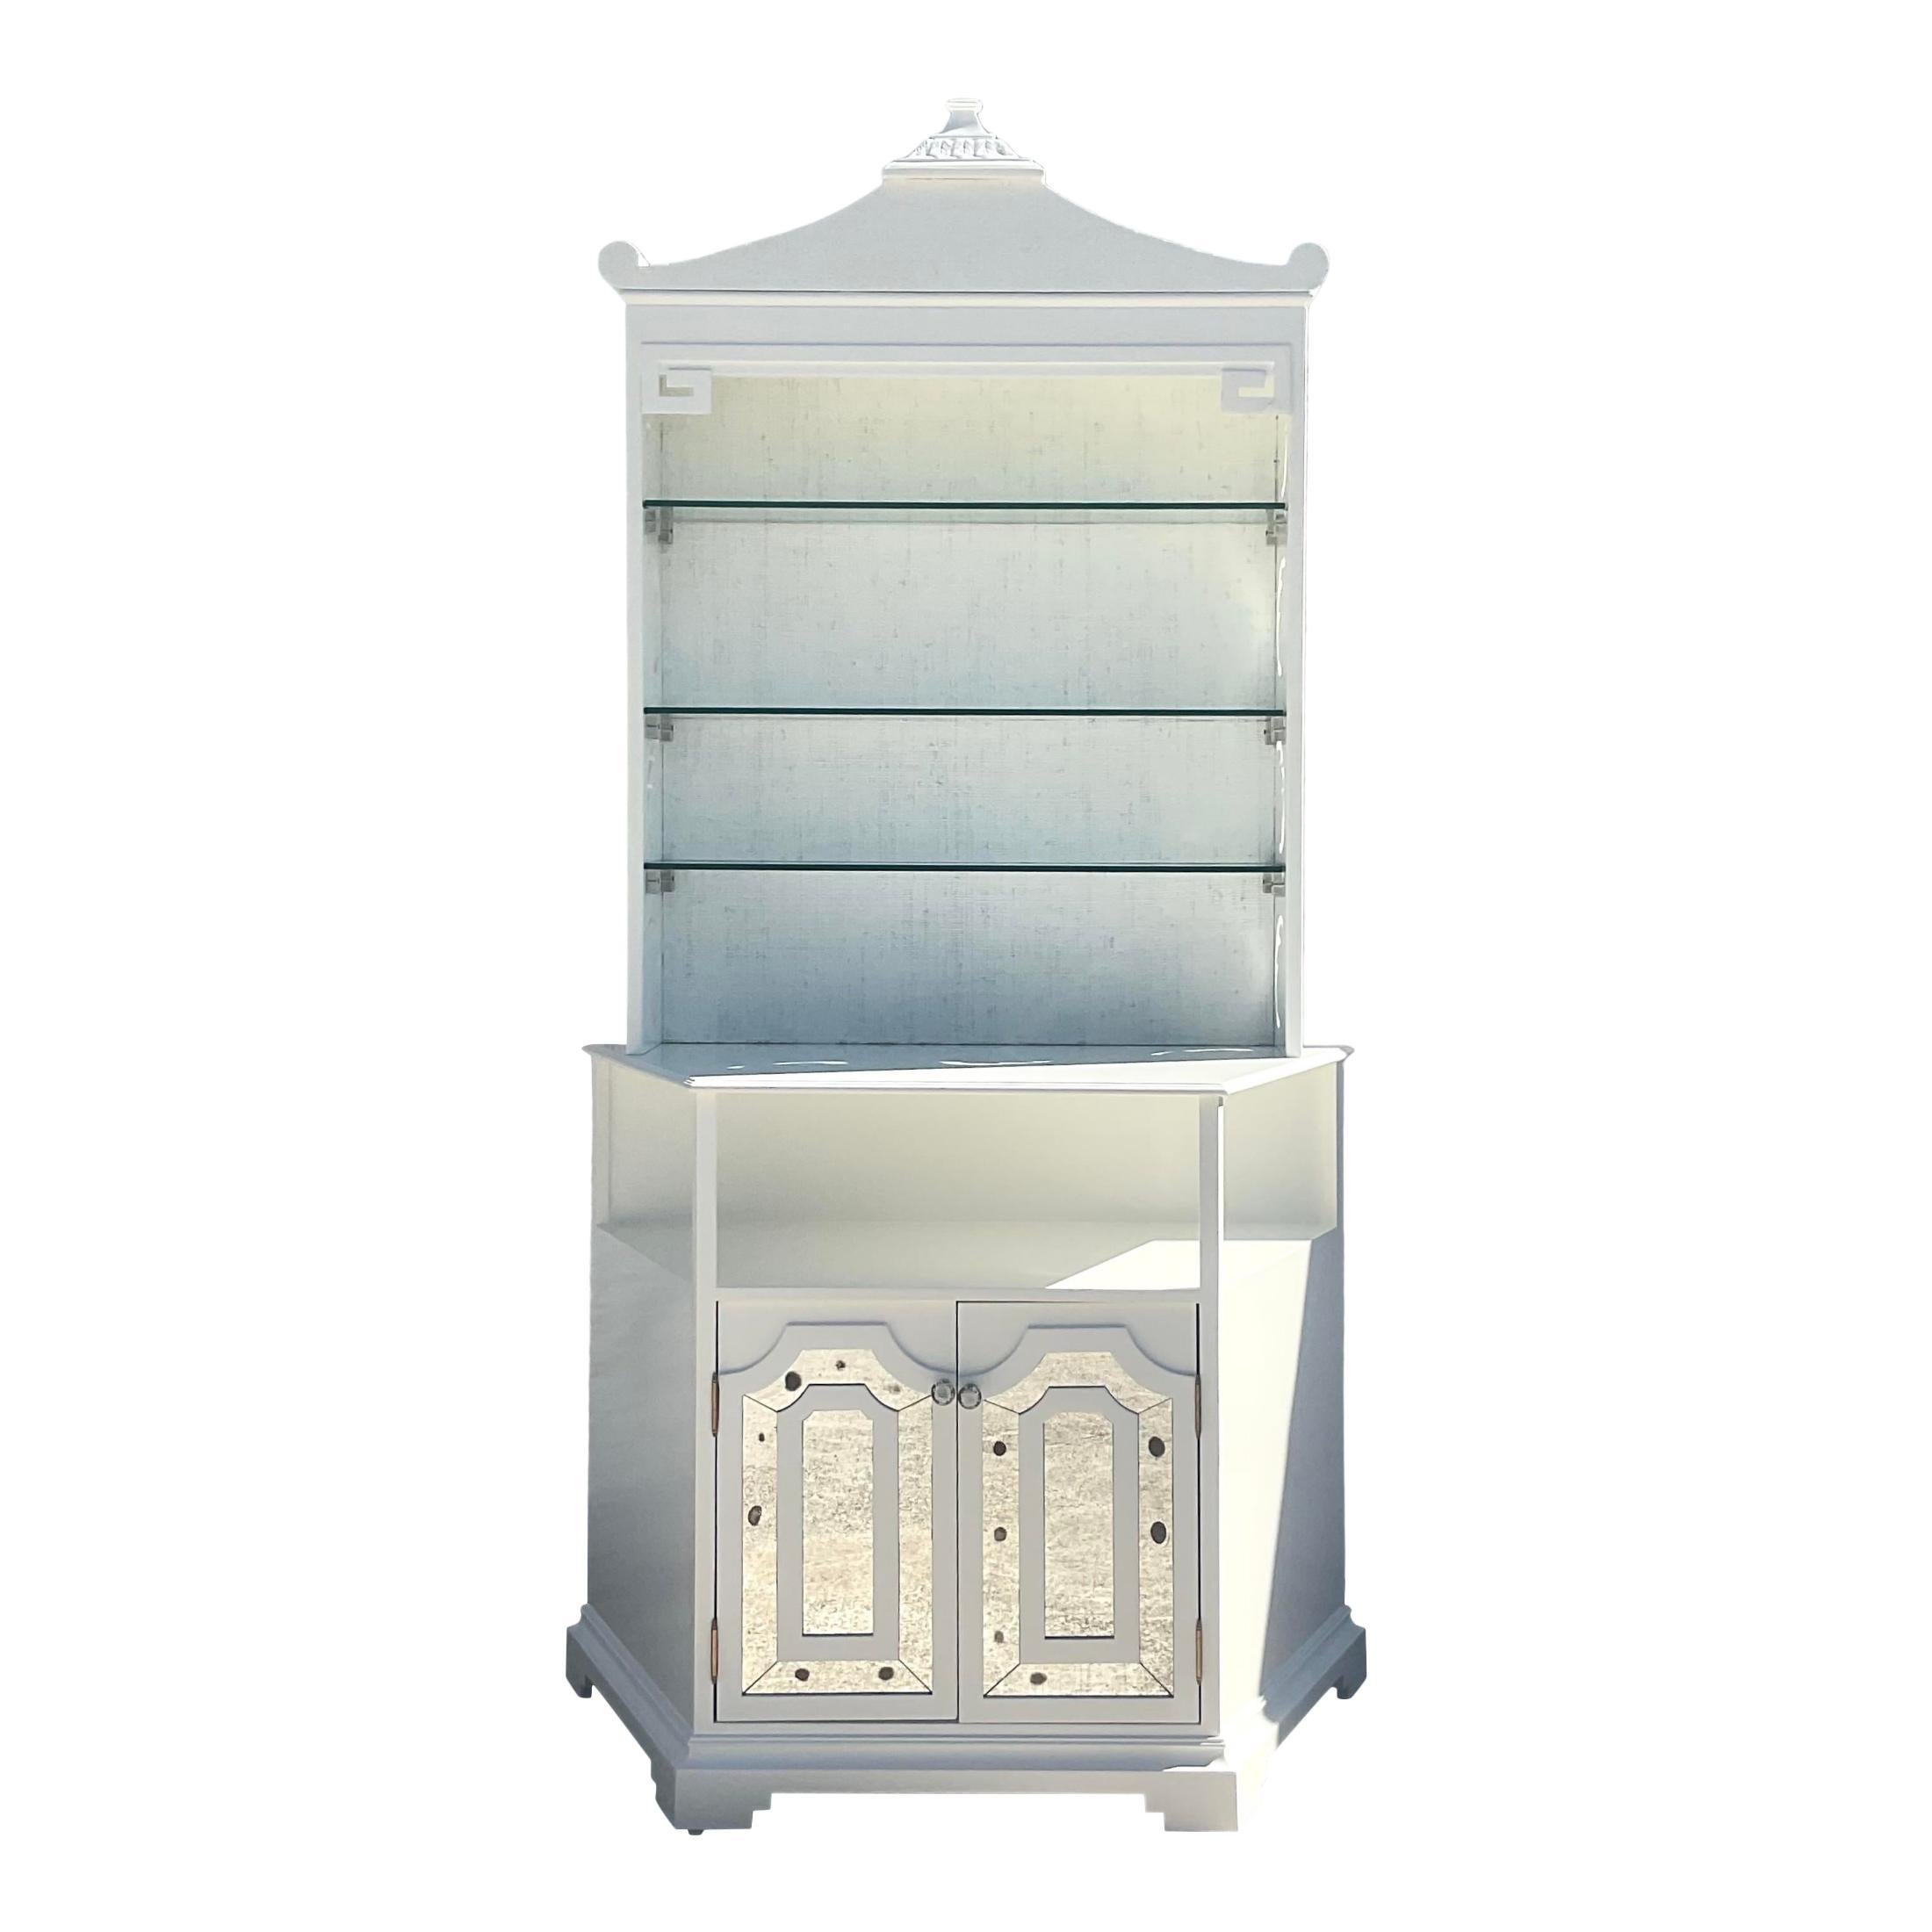 An incredible vintage custom built high gloss white pagoda bar. Monumental in size and drama. A fresh white lacquer and mirrored glass details make this piece a real sparkling diamond. Grasscloth touches throughout the piece. Hails from the estate